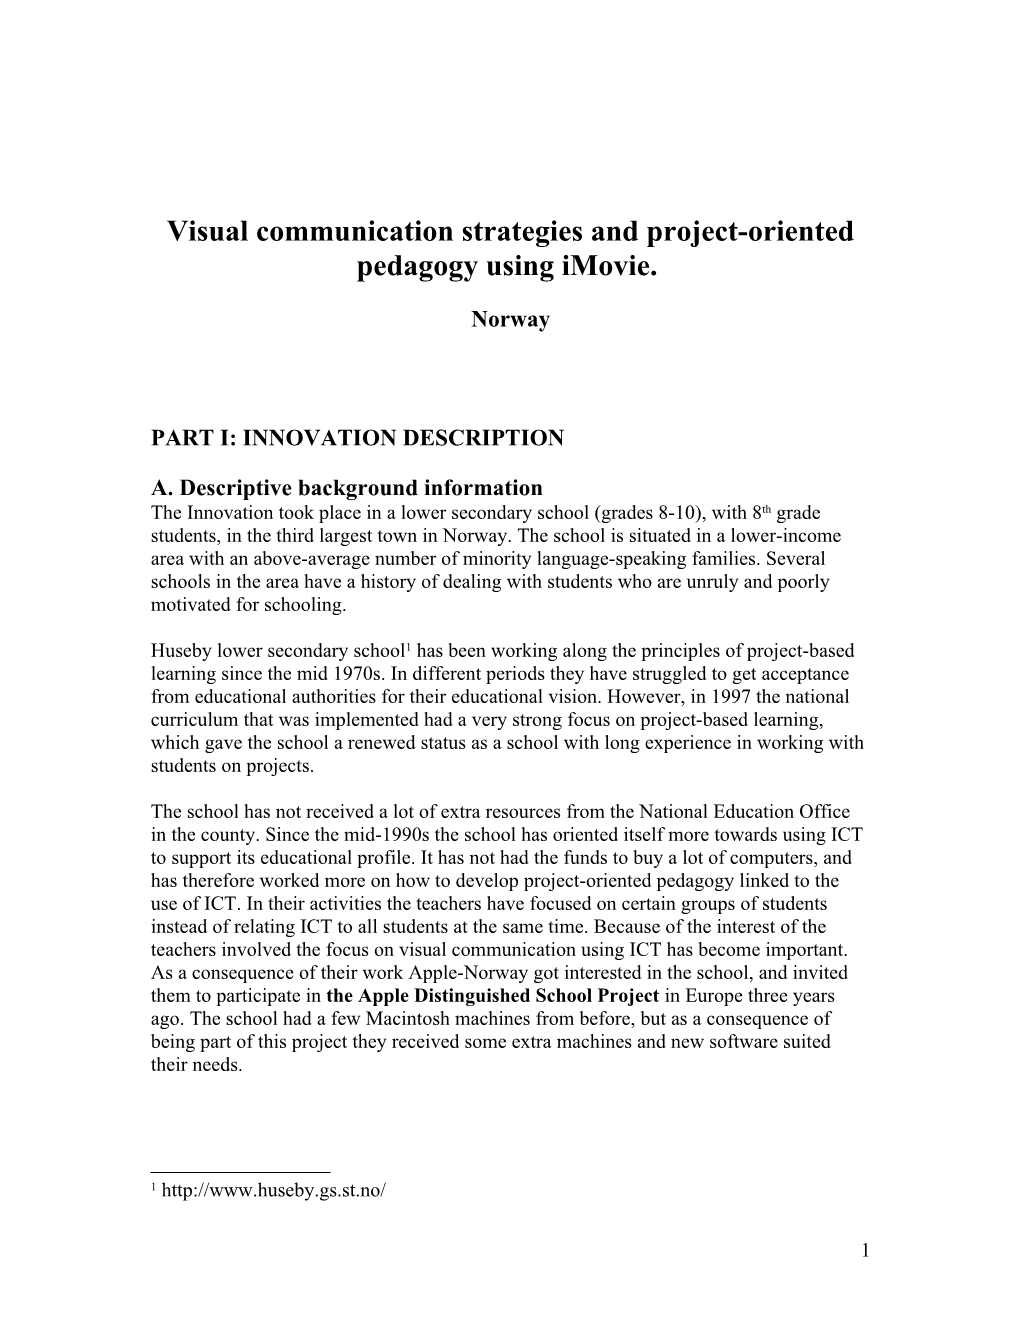 Visual Communication Strategies and Project-Oriented Pedagogy Using Imovie